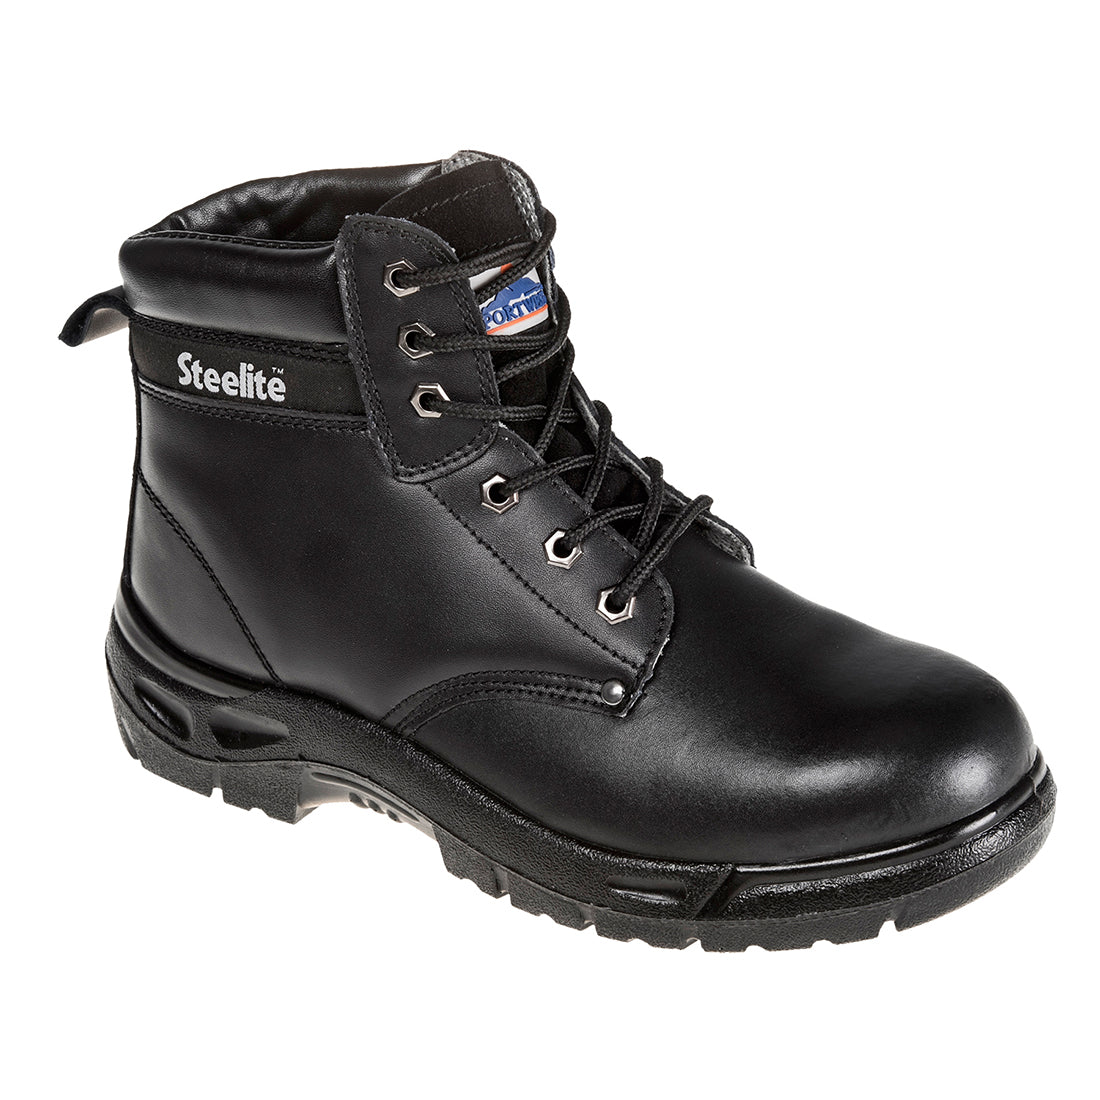 PORTWEST SIZE 10.5 / 45 FW03 Black Steelite Boot S3 Steel toe safety boot rigger